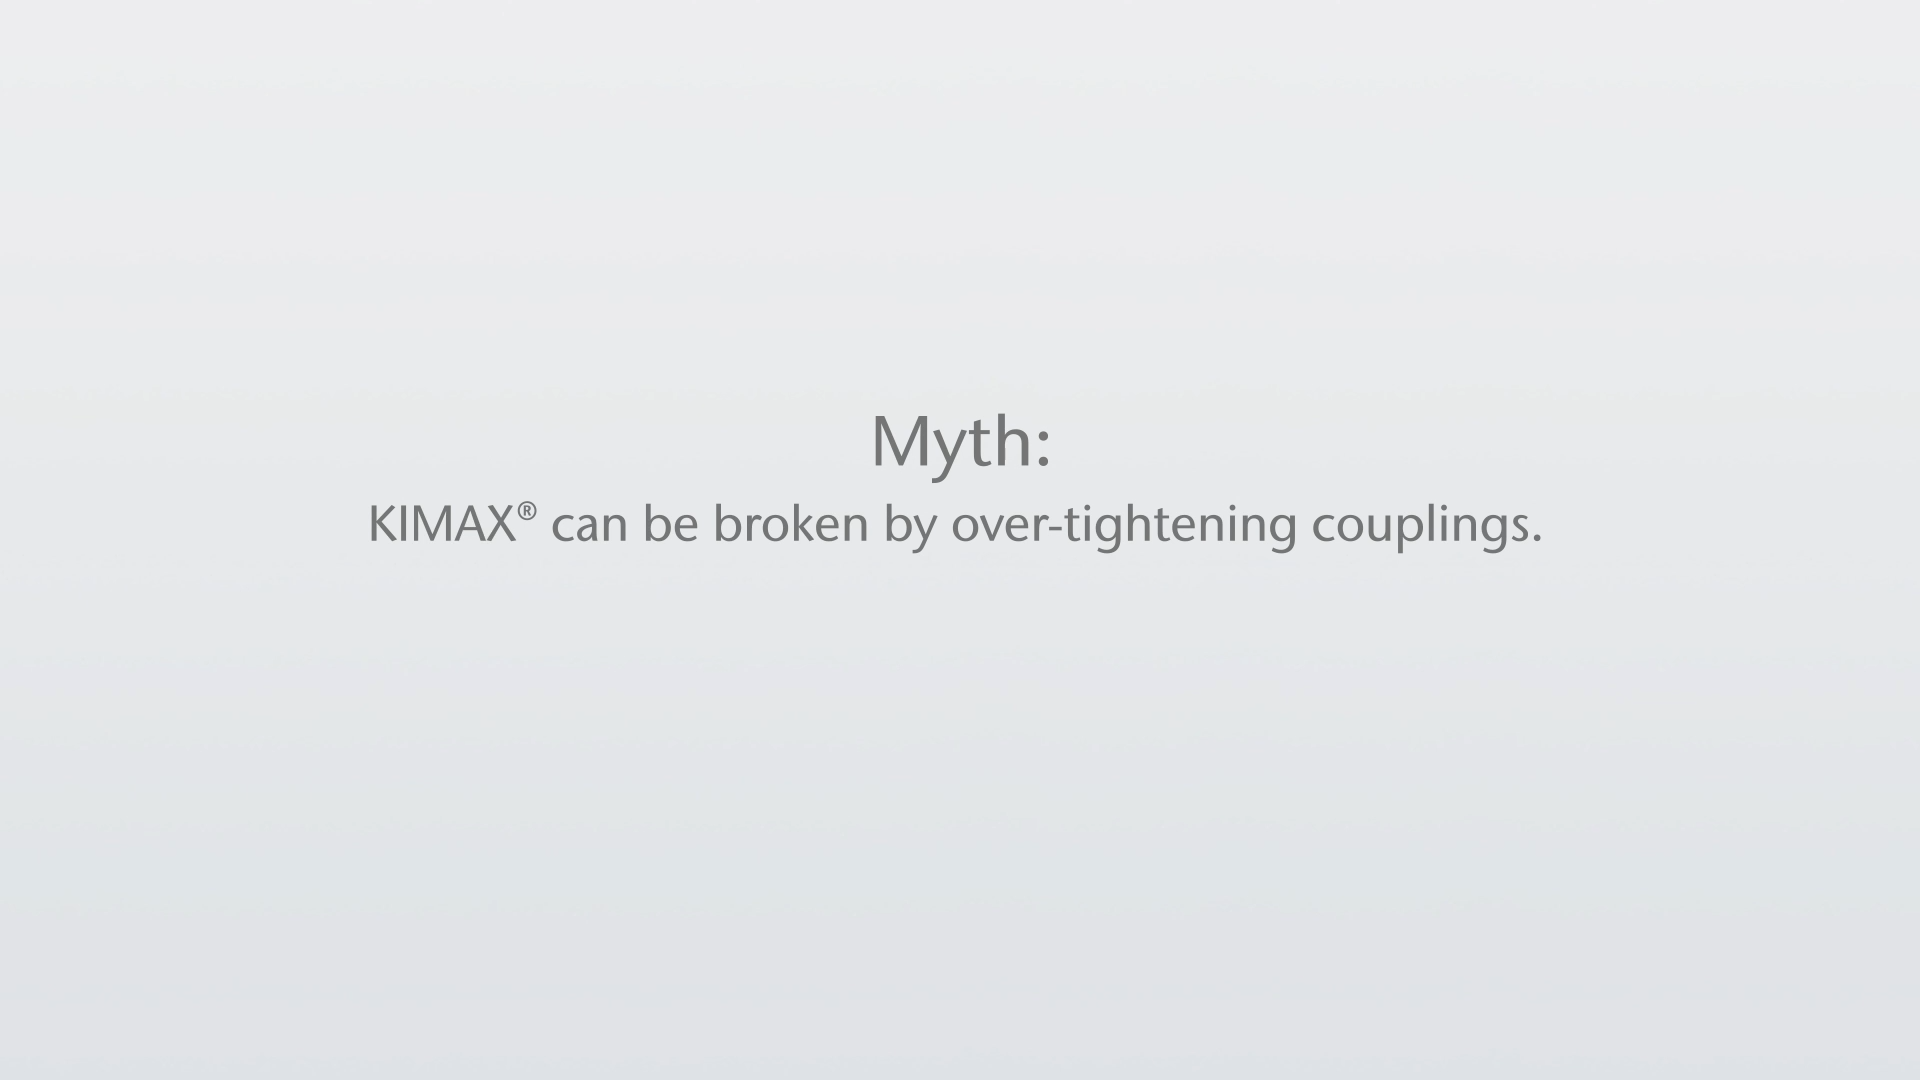 Thumbnail_KIMAX Myths & Truths-KIMAX can be broken by over-tightening couplings.png